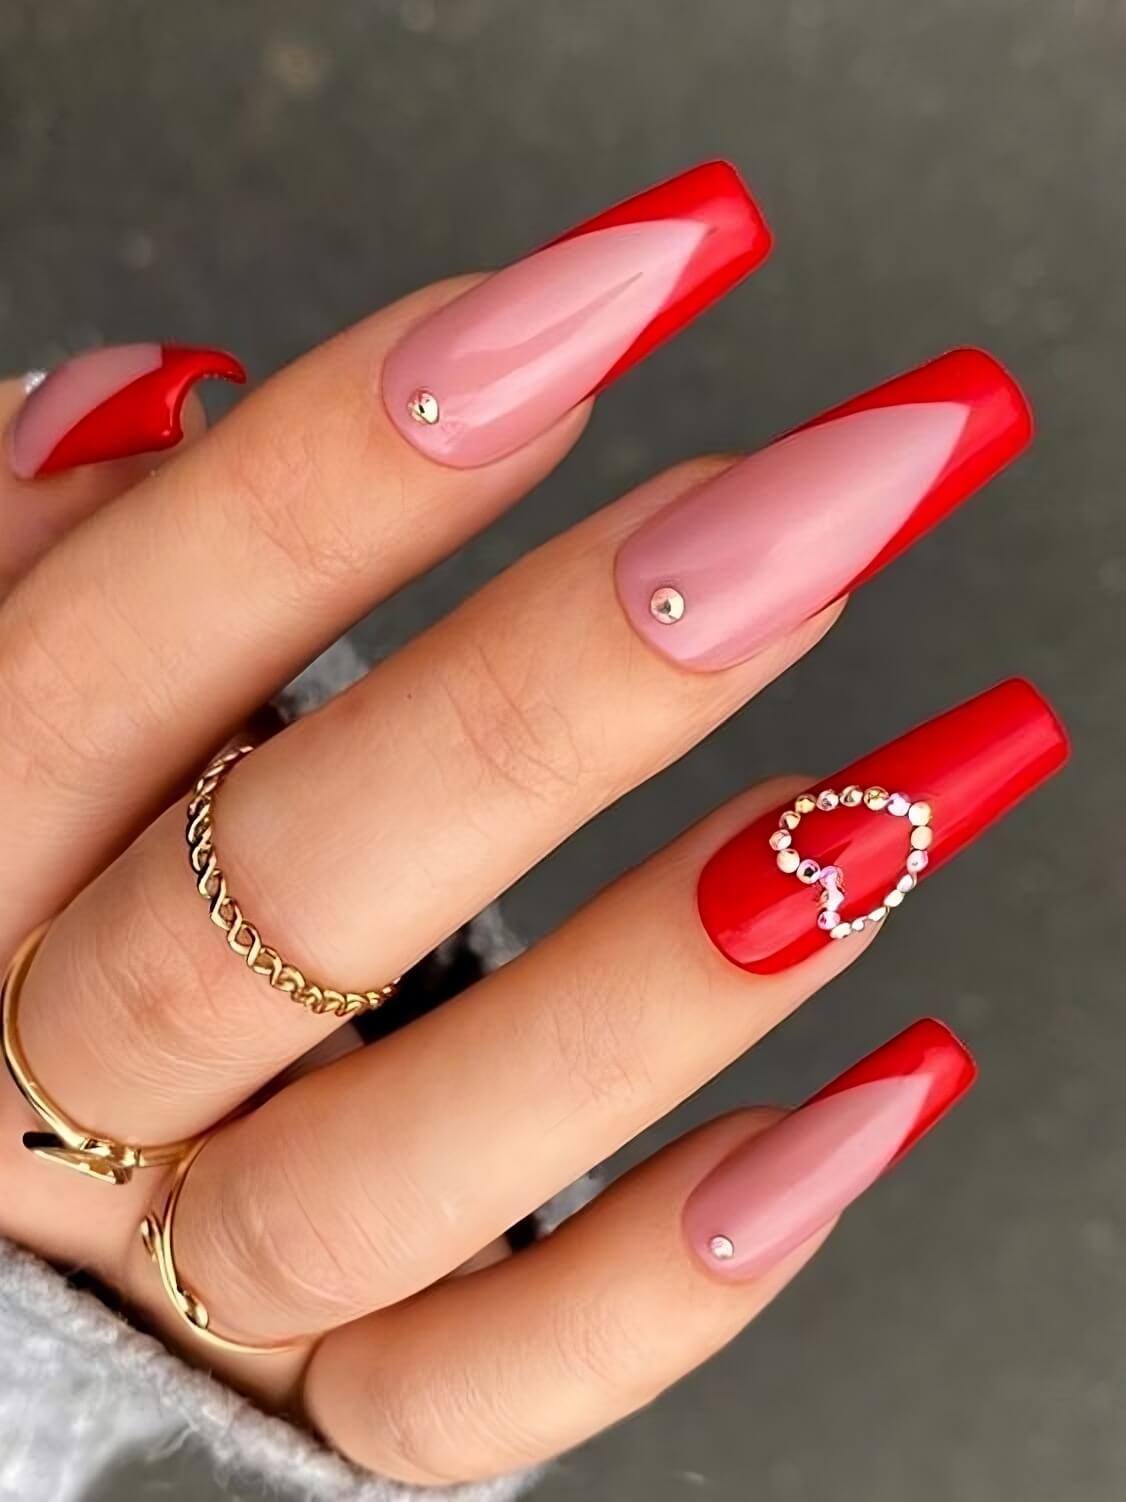 30 One-Of-A-Kind Red Nail Designs To Impress Anybody - 191